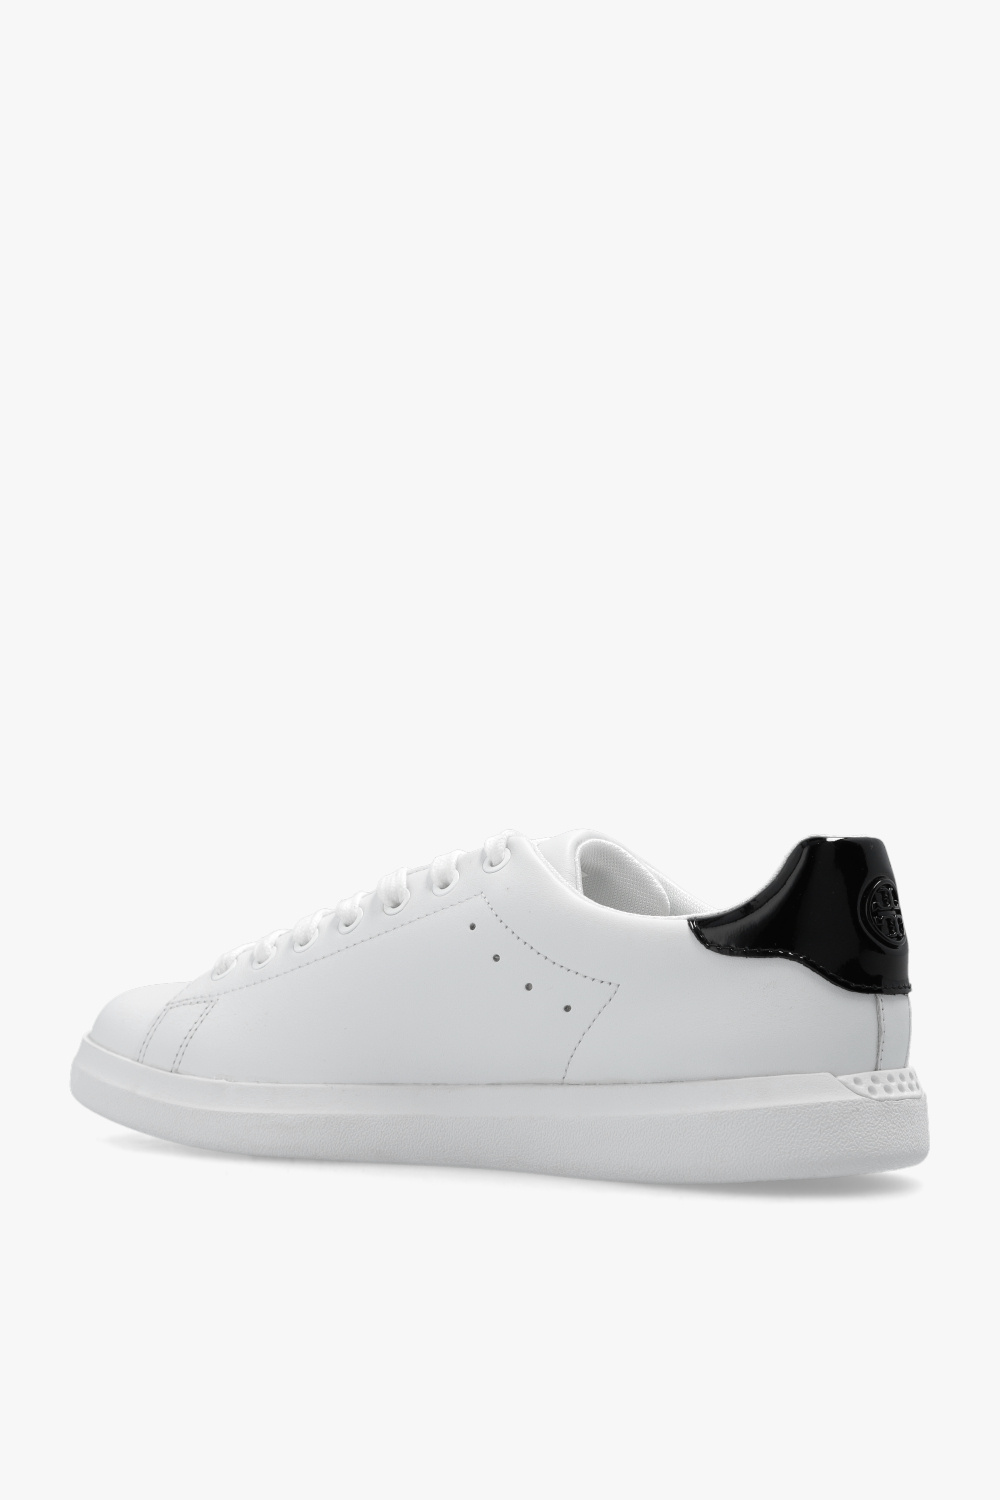 Tory Burch ‘Howell’ sneakers